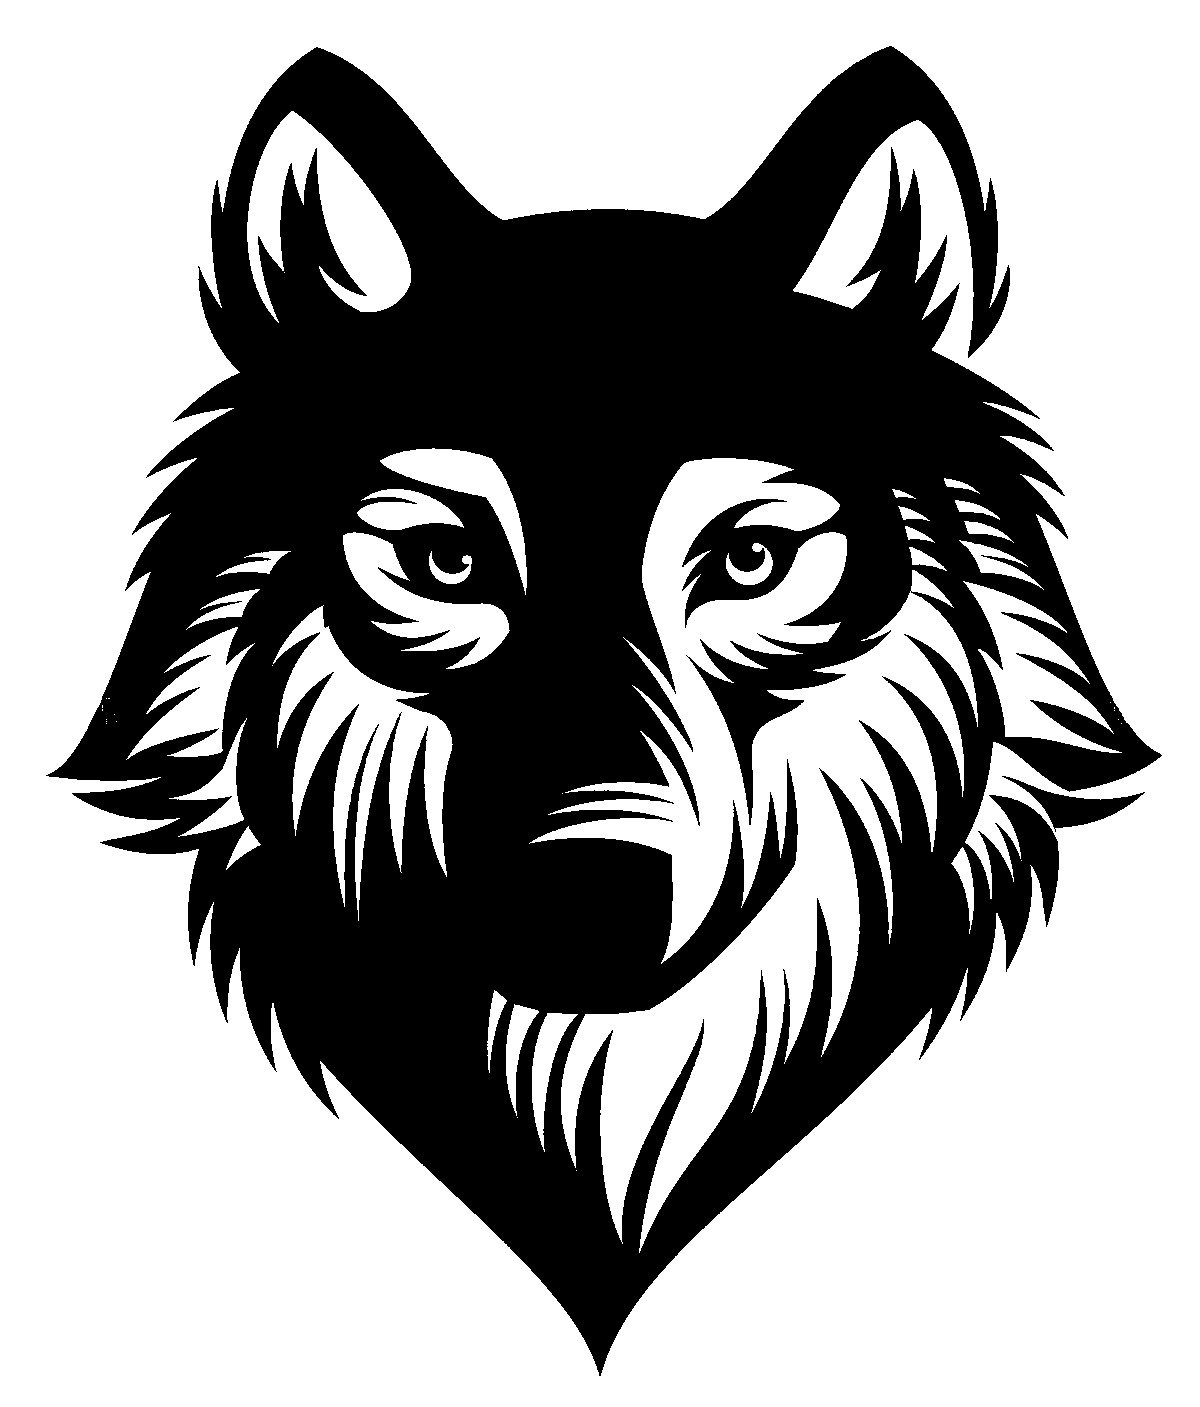 Wolf Stencil PDF File Free Download - 3axis.co